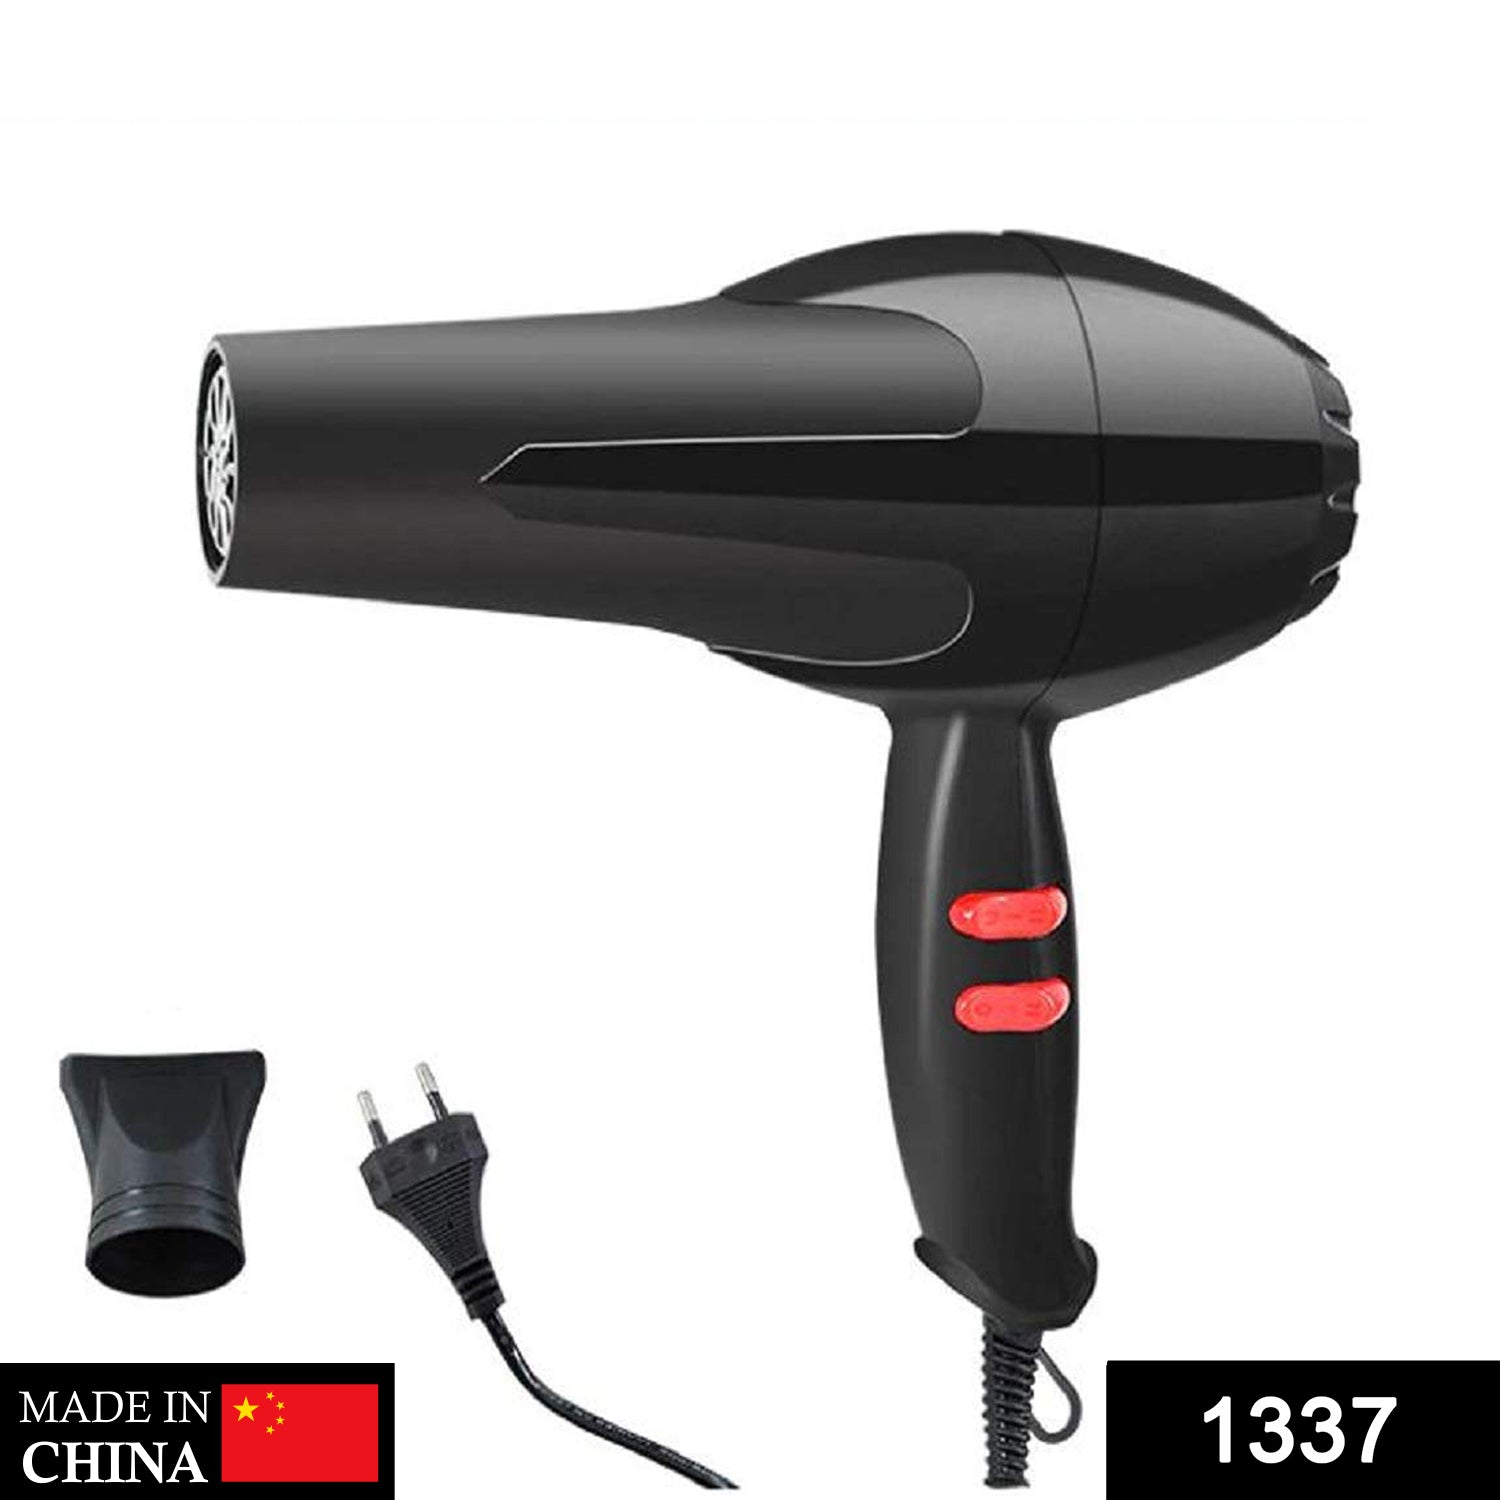 Professional Stylish Hair Dryers For Women And Men (Hot And Cold Dryer)